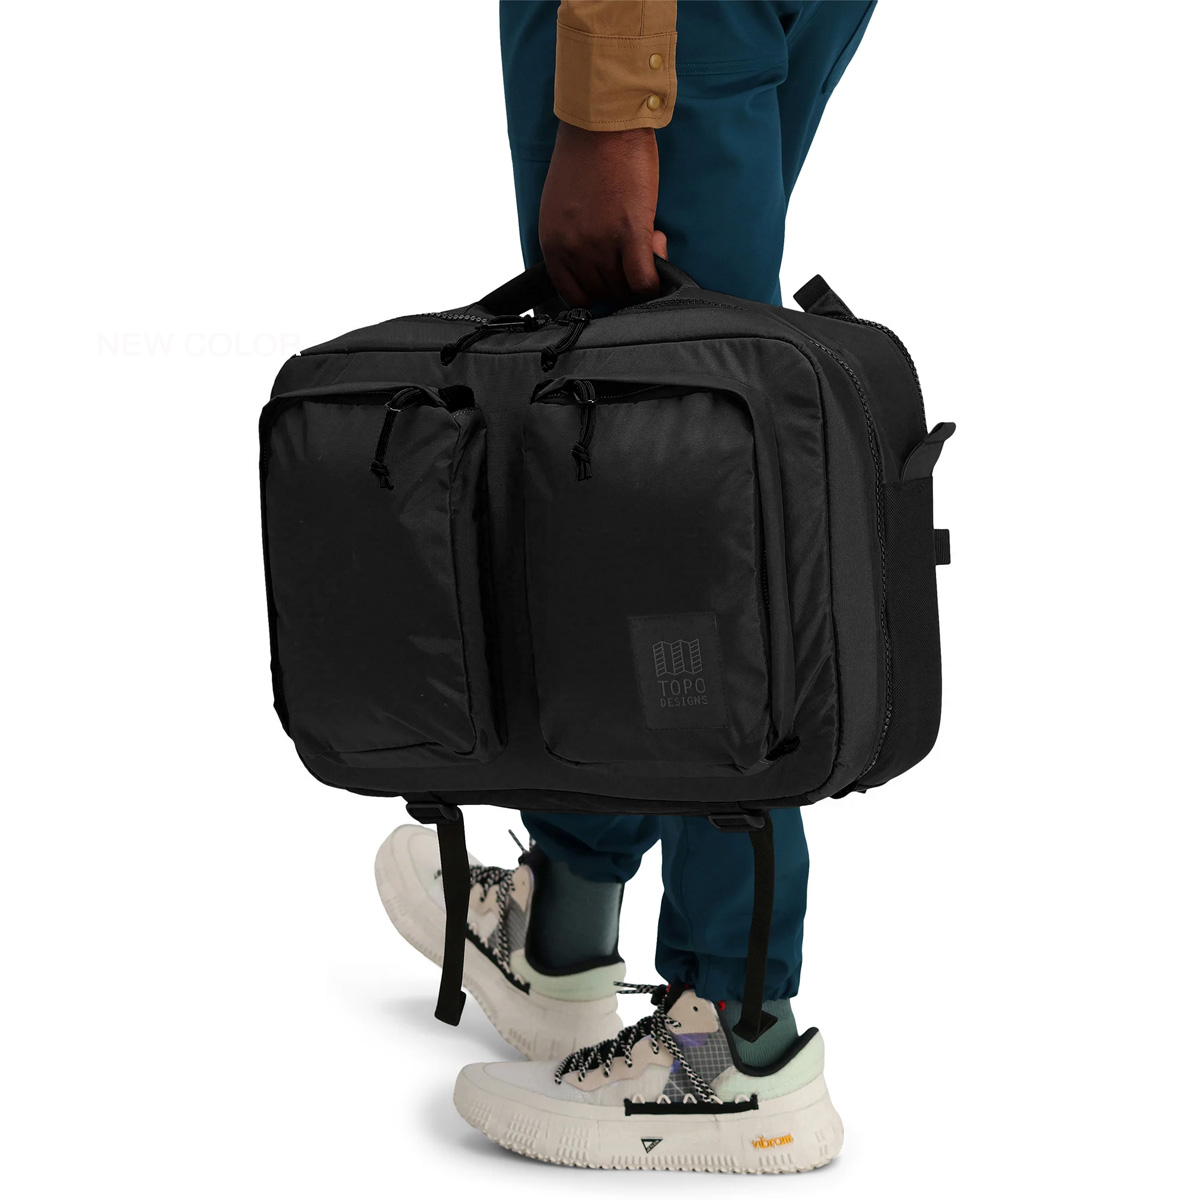 Topo Designs Global Briefcase Black, carrying in hand